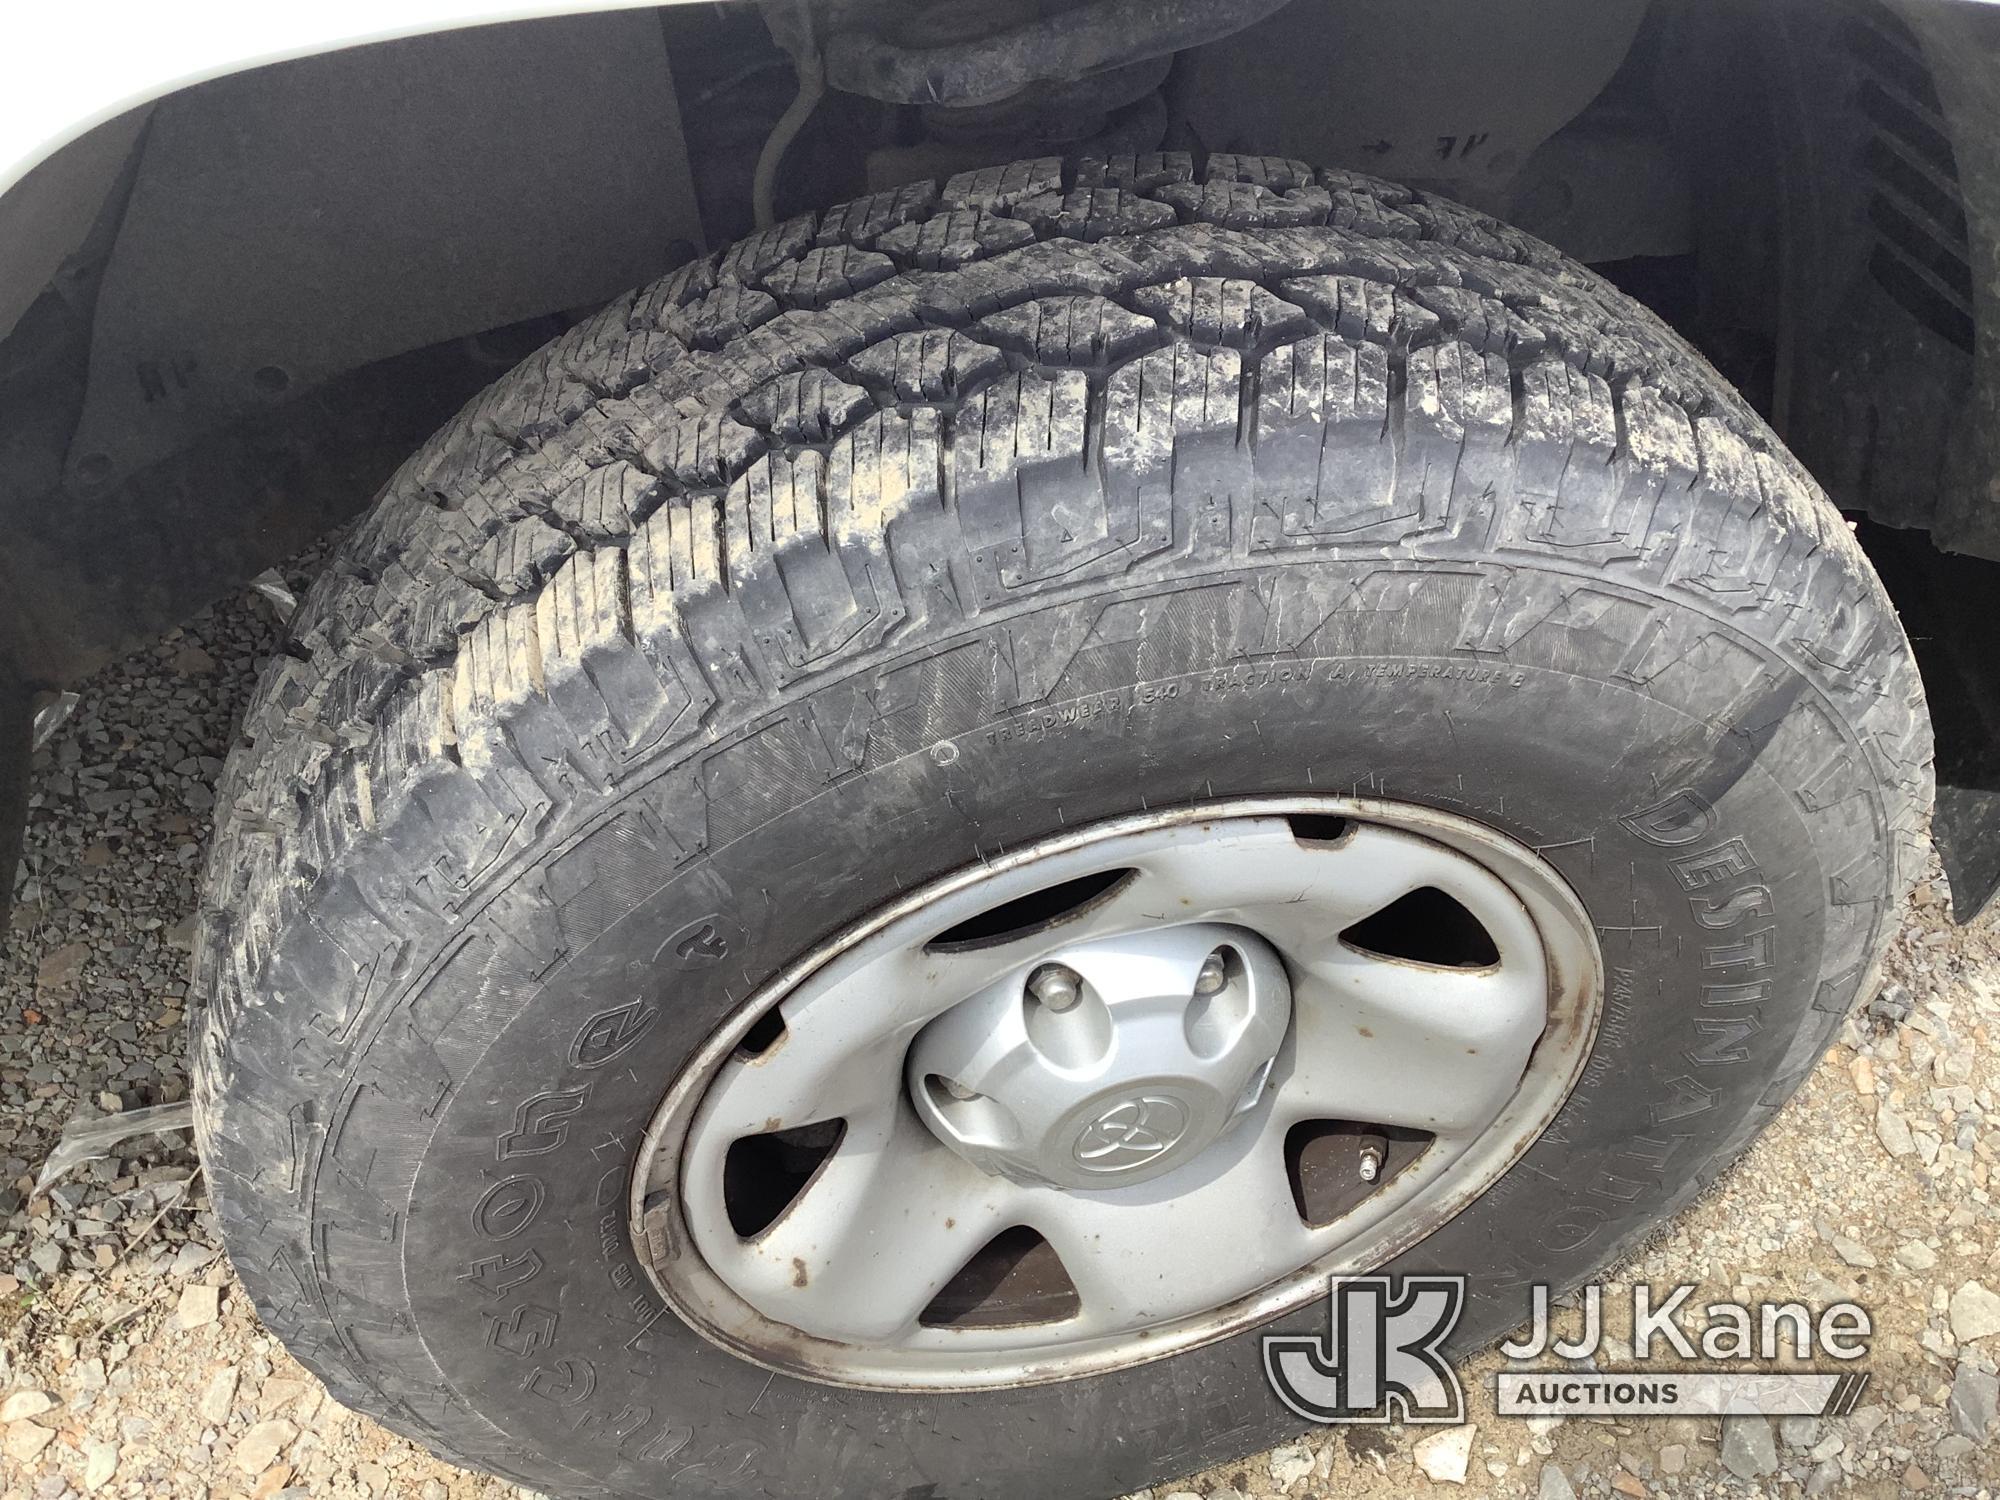 (Smock, PA) 2018 Toyota Tacoma 4x4 Extended-Cab Pickup Truck Not Running, Bad Engine, Rust, Paint &